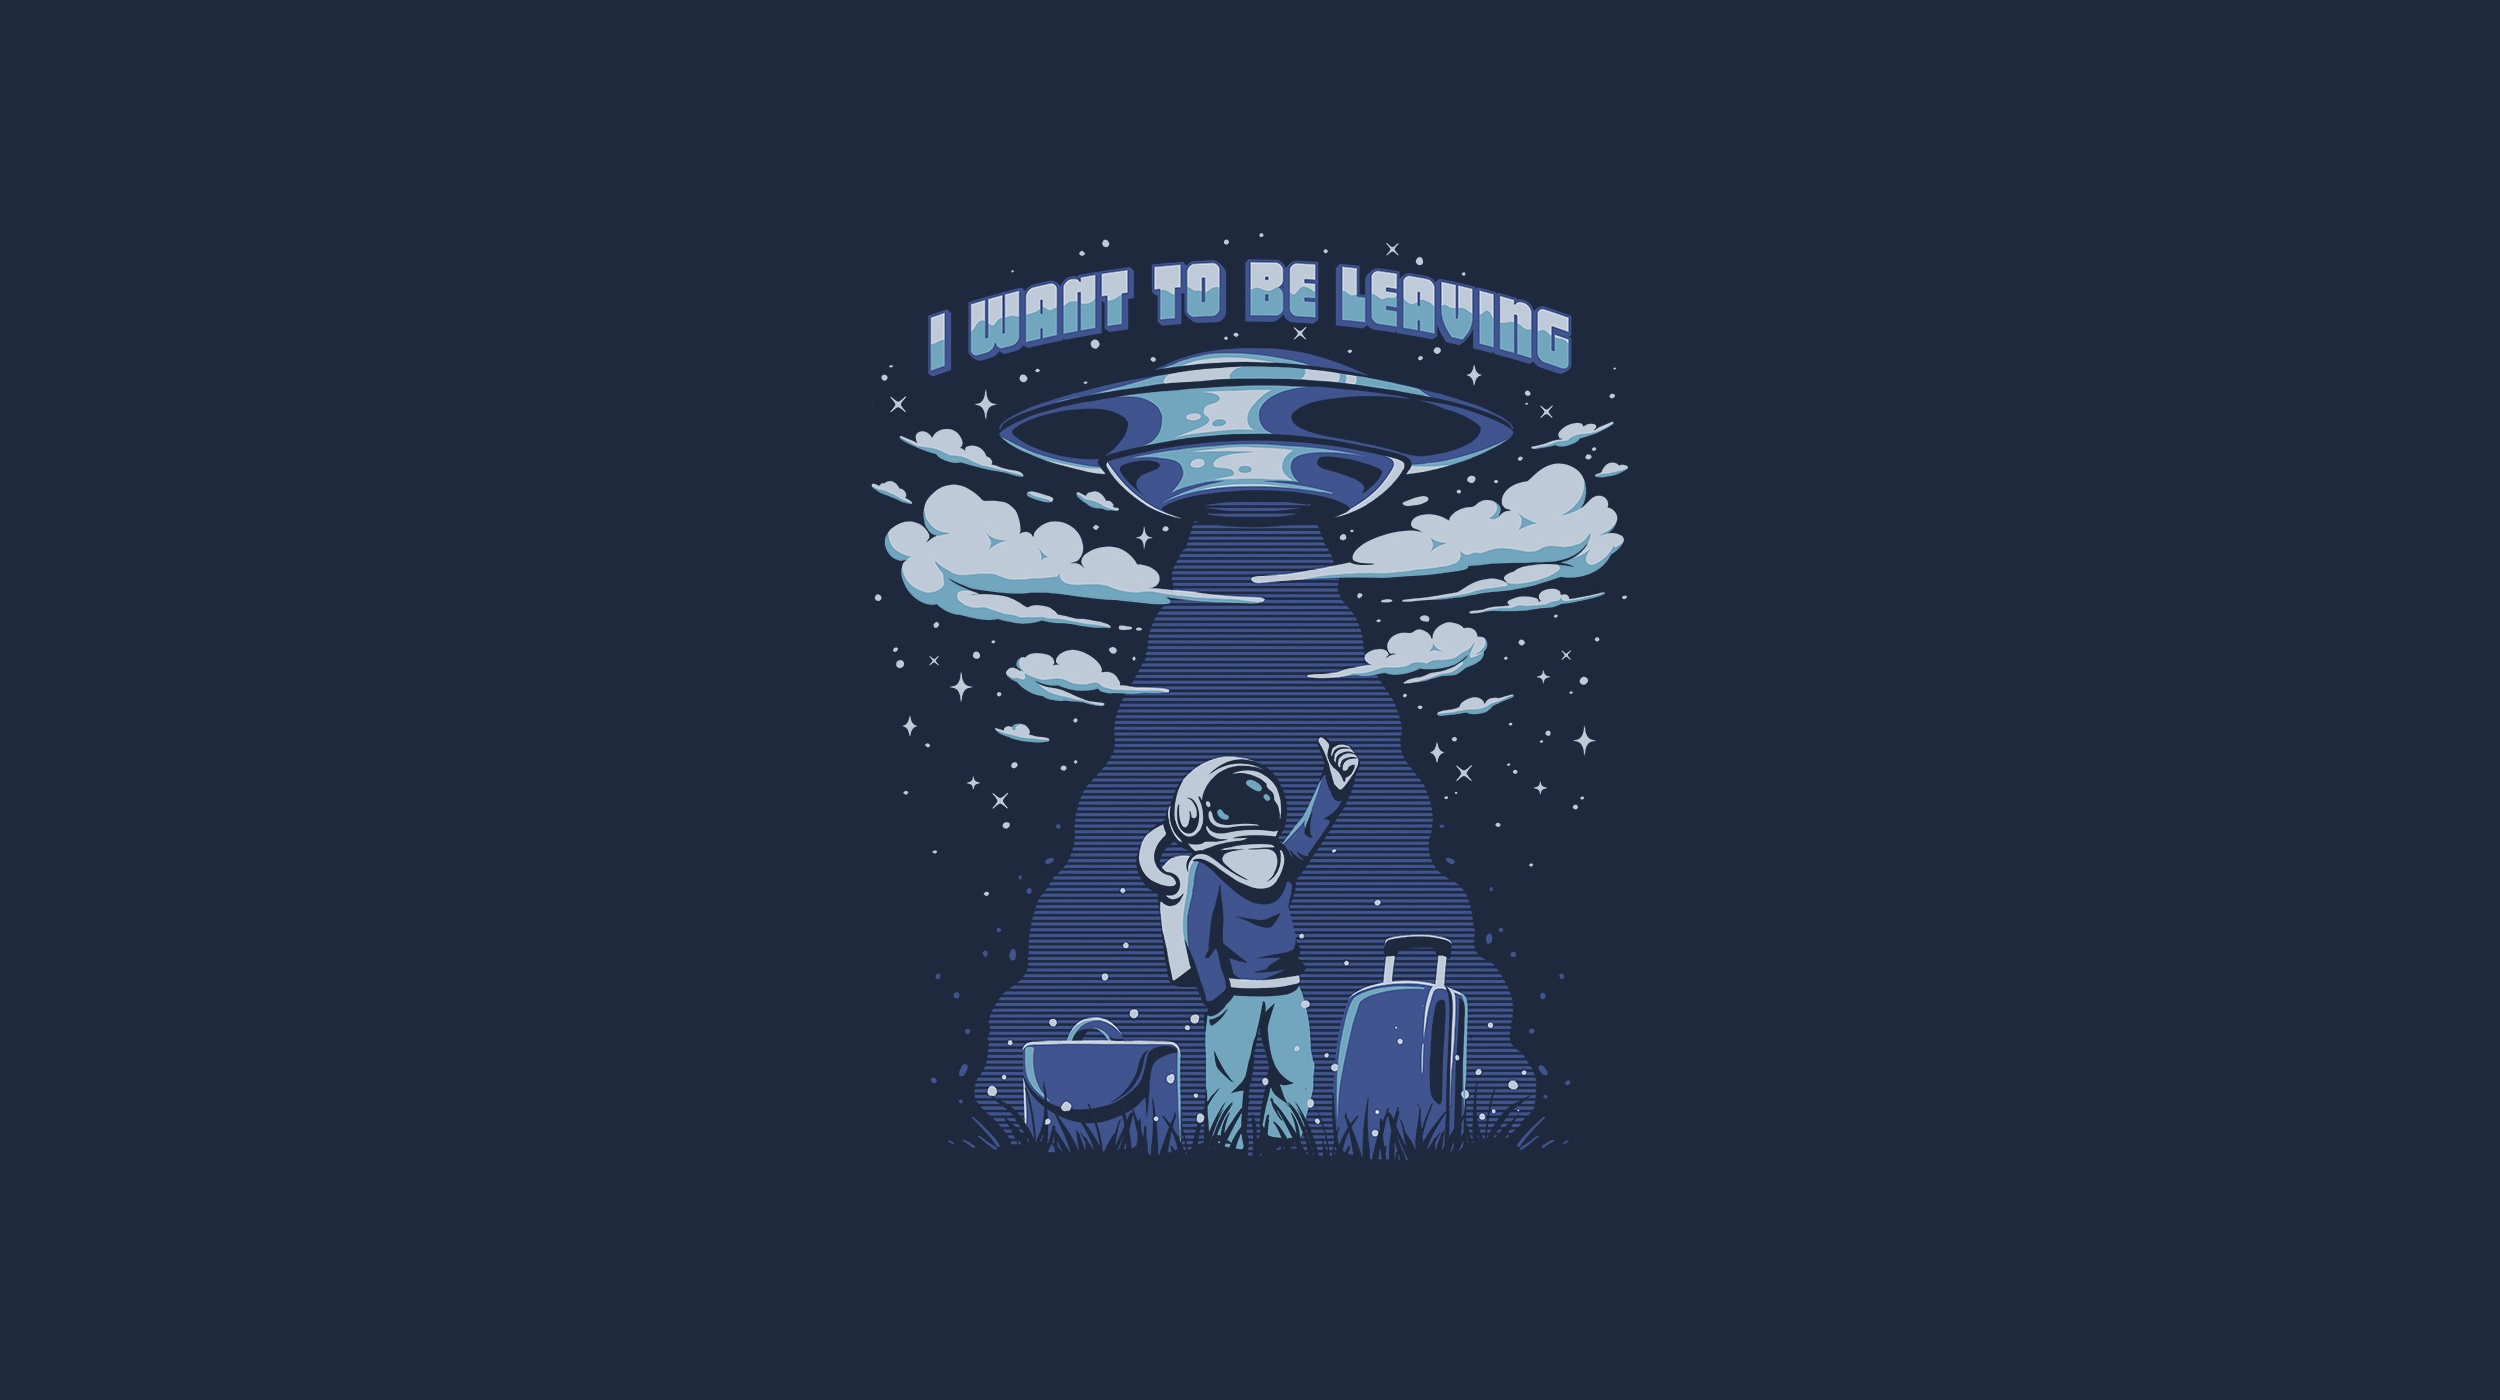 The Hitchhikers Guide To The Galaxy UFO Astronaut Suitcase Luggage Humor Space Travel Alien Abductio 2500x1400